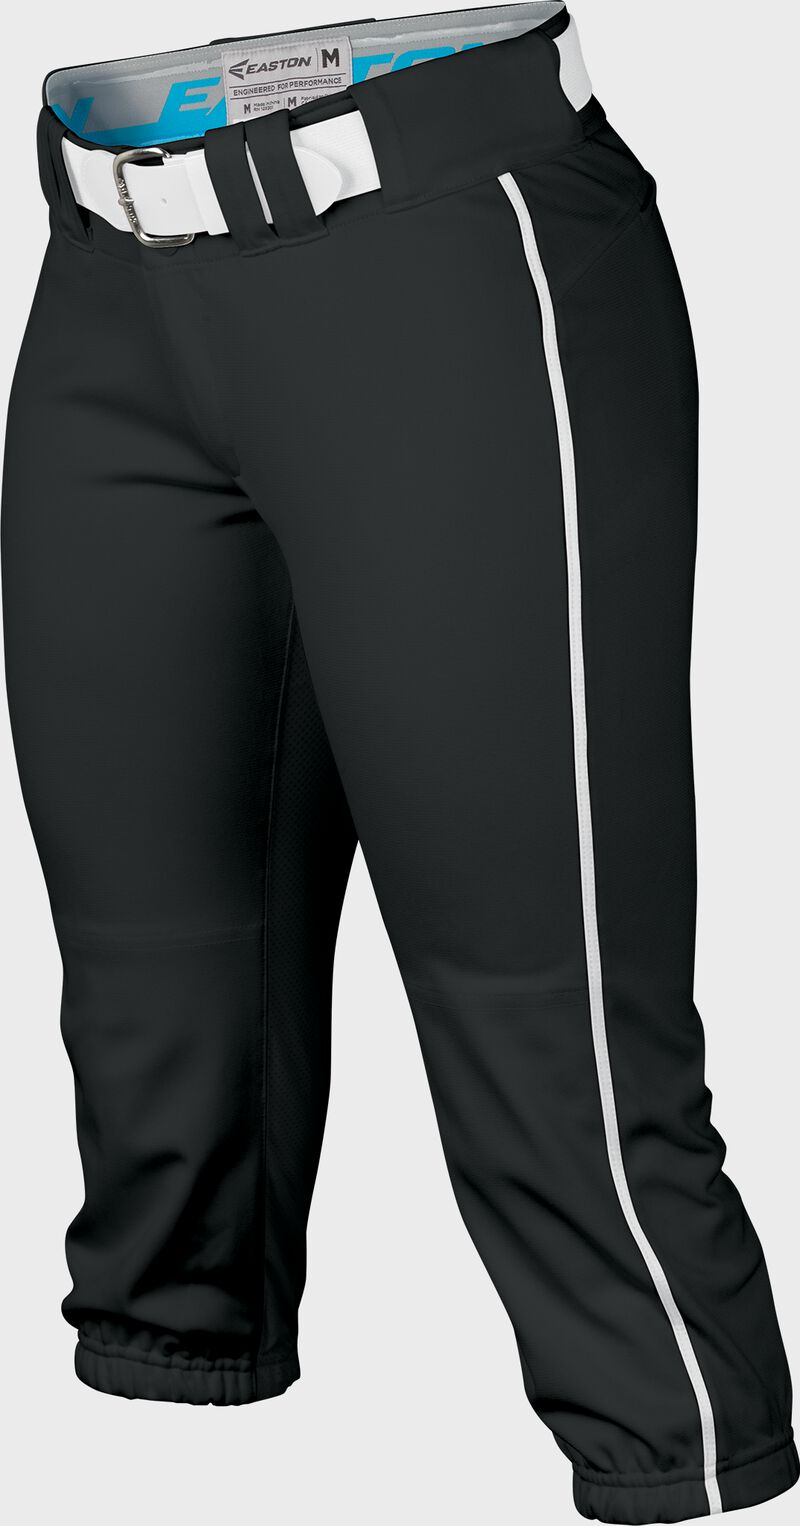 Easton Prowess Softball Pant Women's Piped BLACK/WHITE  M